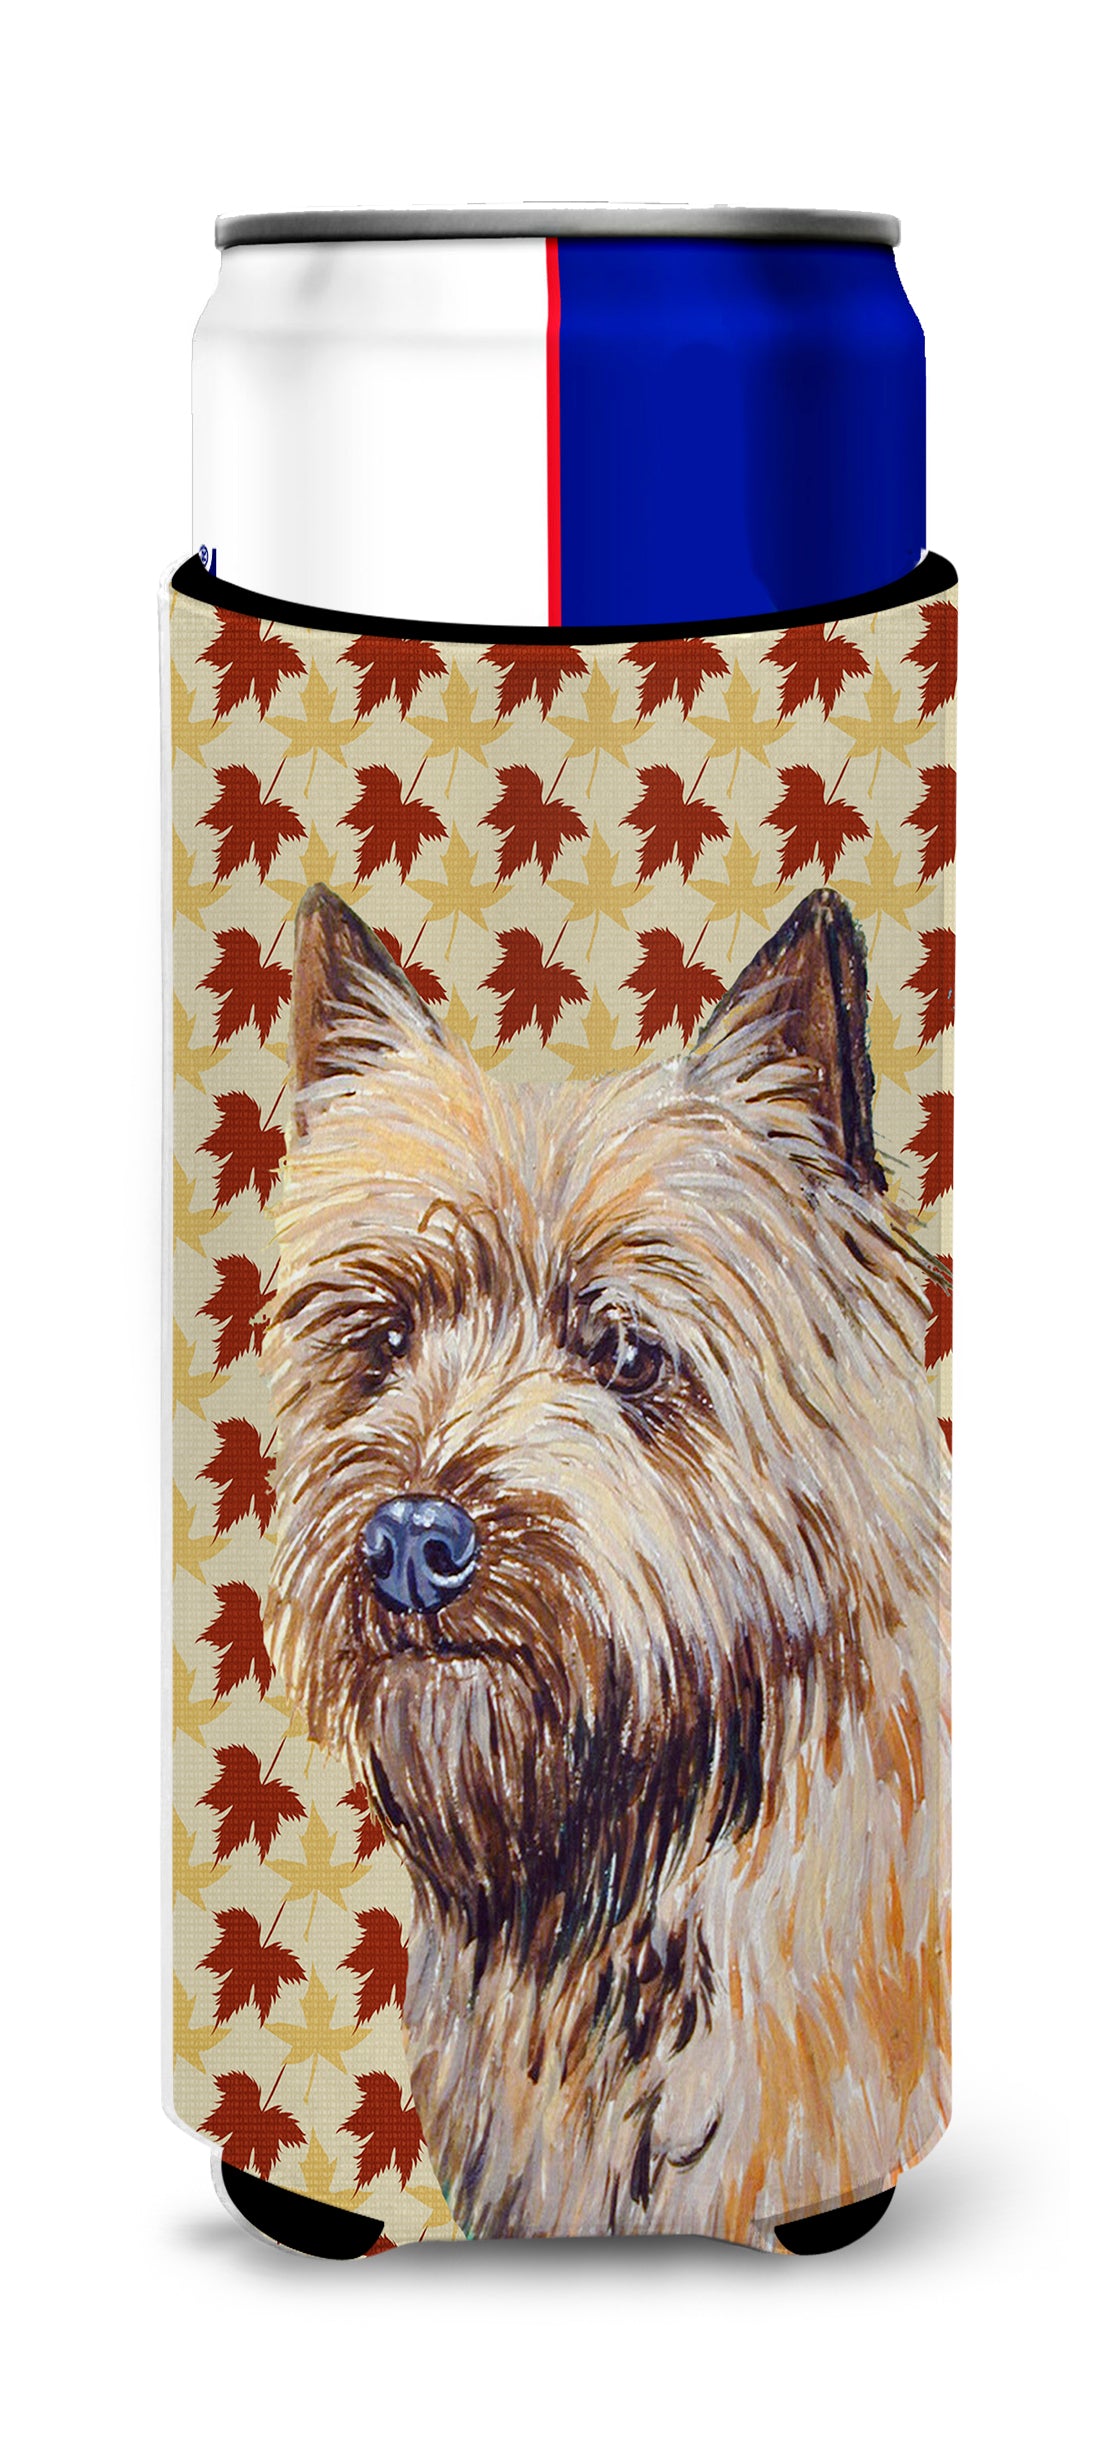 Cairn Terrier Fall Leaves Portrait Ultra Beverage Insulators for slim cans LH9095MUK.